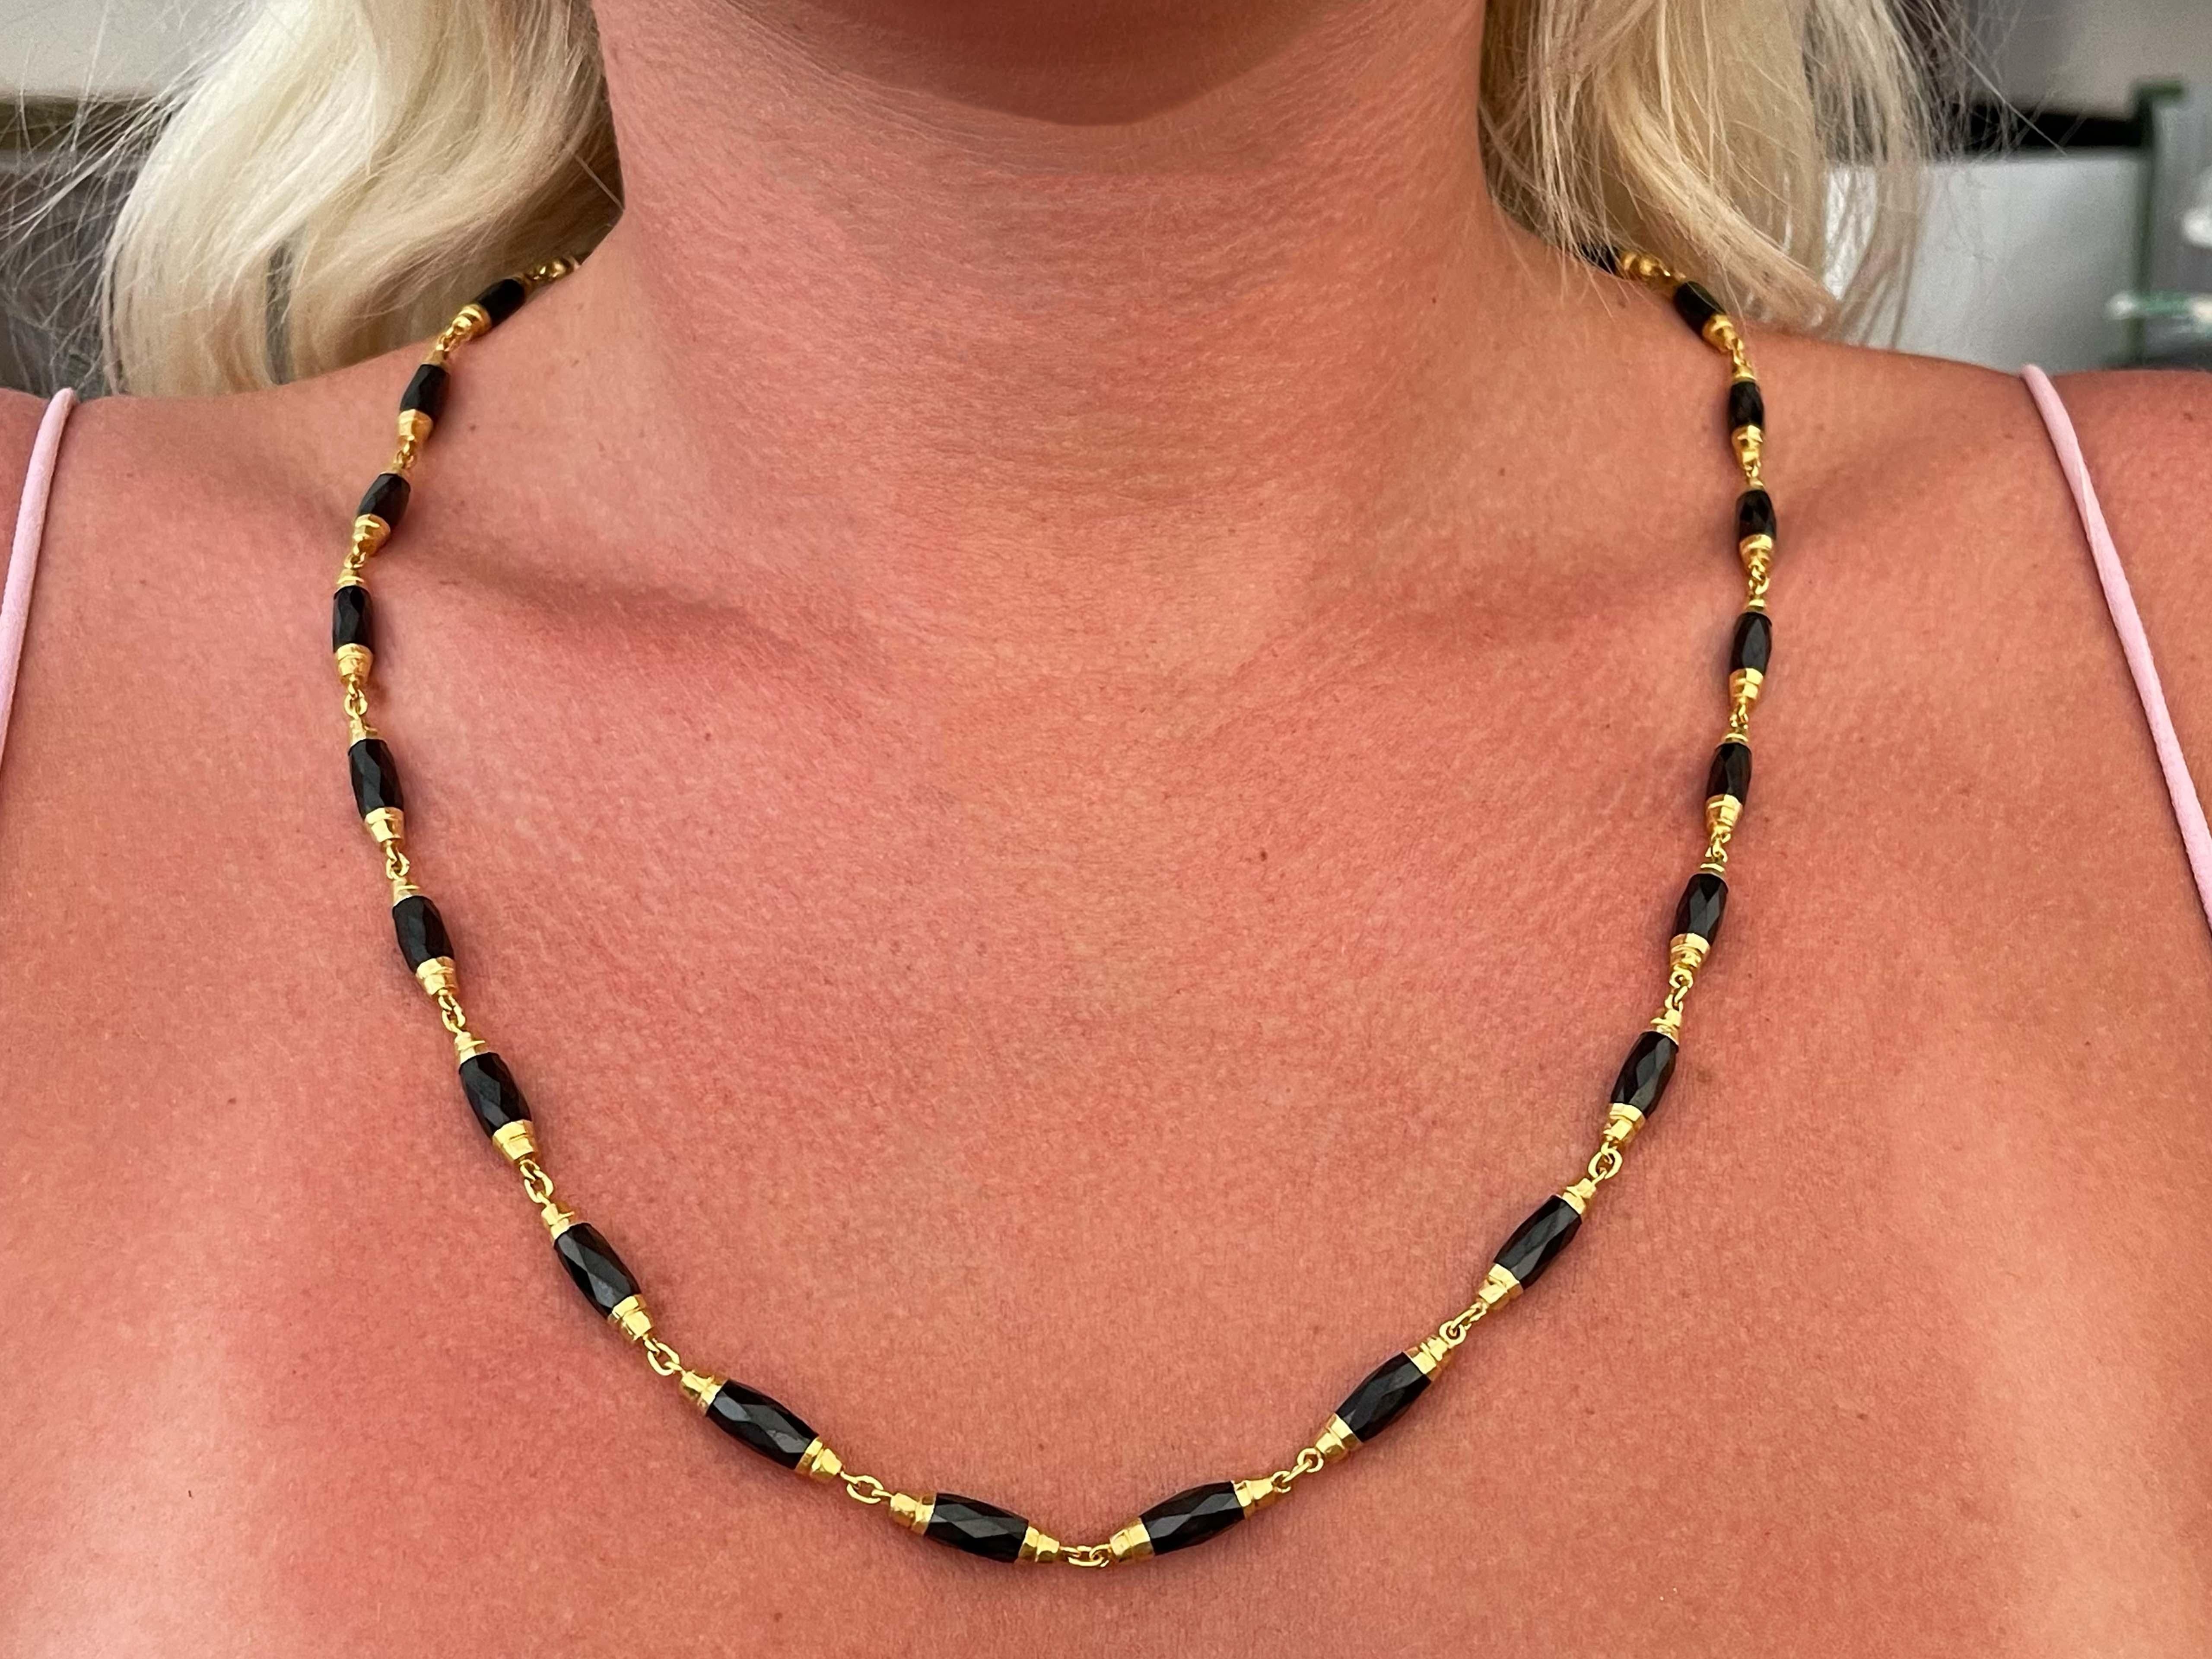 Item Specifications:

Necklace Metal: 22k Yellow Gold

Gemstone: Black onyx

Total Weight: 33.4 Grams

Length: 24